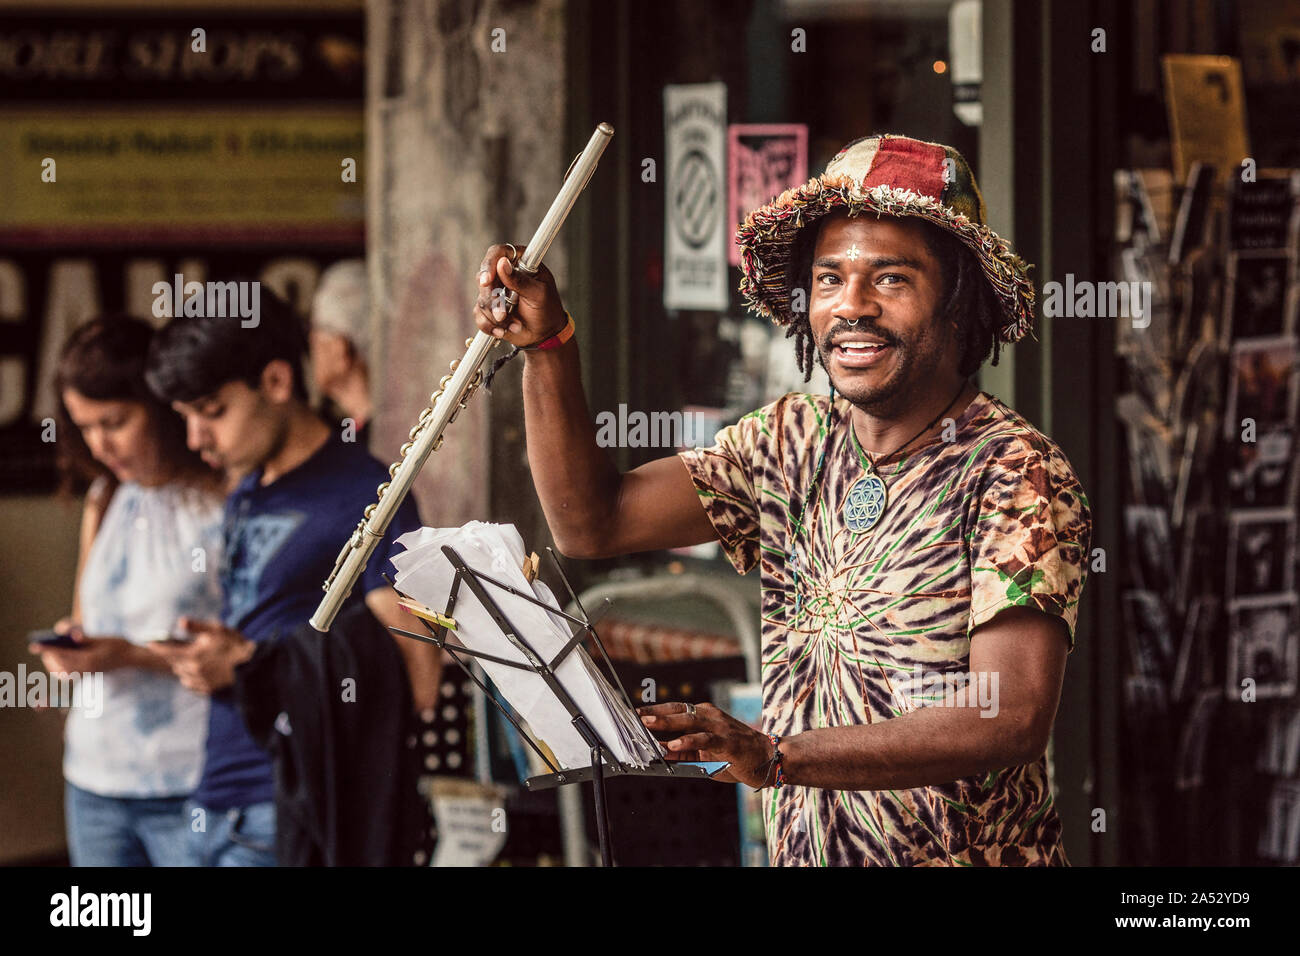 Street musician plays flute at Pike Place Market while kids on phones Stock Photo